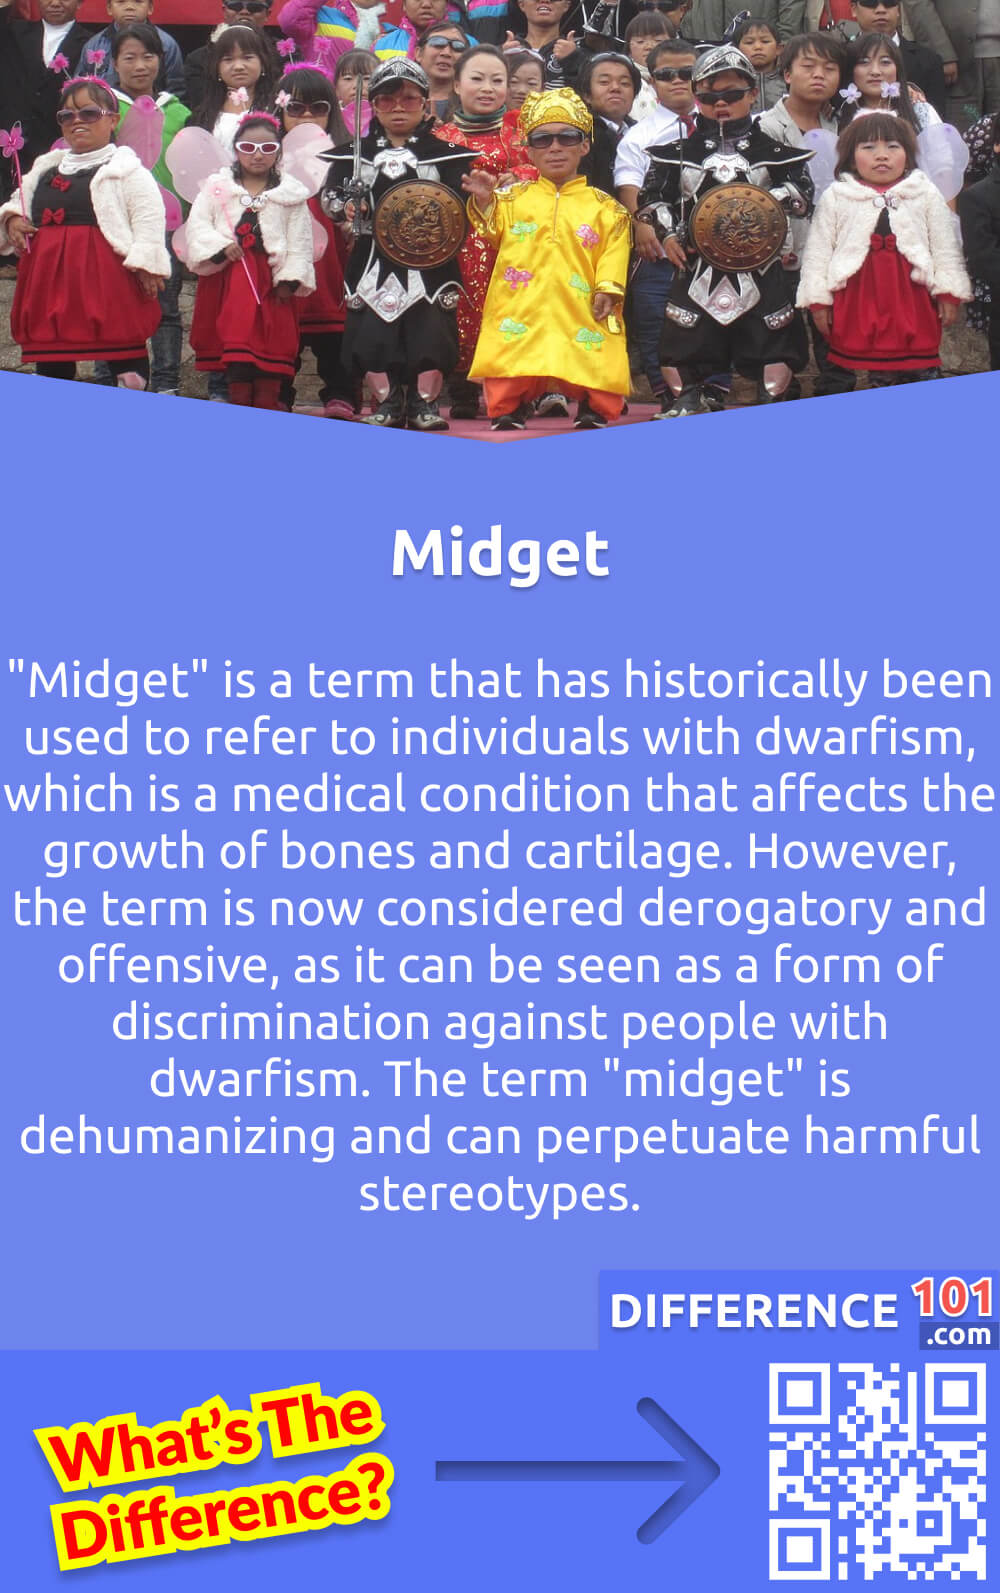 What Is Midget? "Midget" is a term that has historically been used to refer to individuals with dwarfism, which is a medical condition that affects the growth of bones and cartilage. However, the term is now considered derogatory and offensive, as it can be seen as a form of discrimination against people with dwarfism. The term "midget" is dehumanizing and can perpetuate harmful stereotypes. It is important to use respectful and inclusive language when referring to individuals with dwarfism, such as "person with dwarfism" or simply using their name. It is important to recognize and respect the dignity and humanity of all individuals, regardless of their physical characteristics.